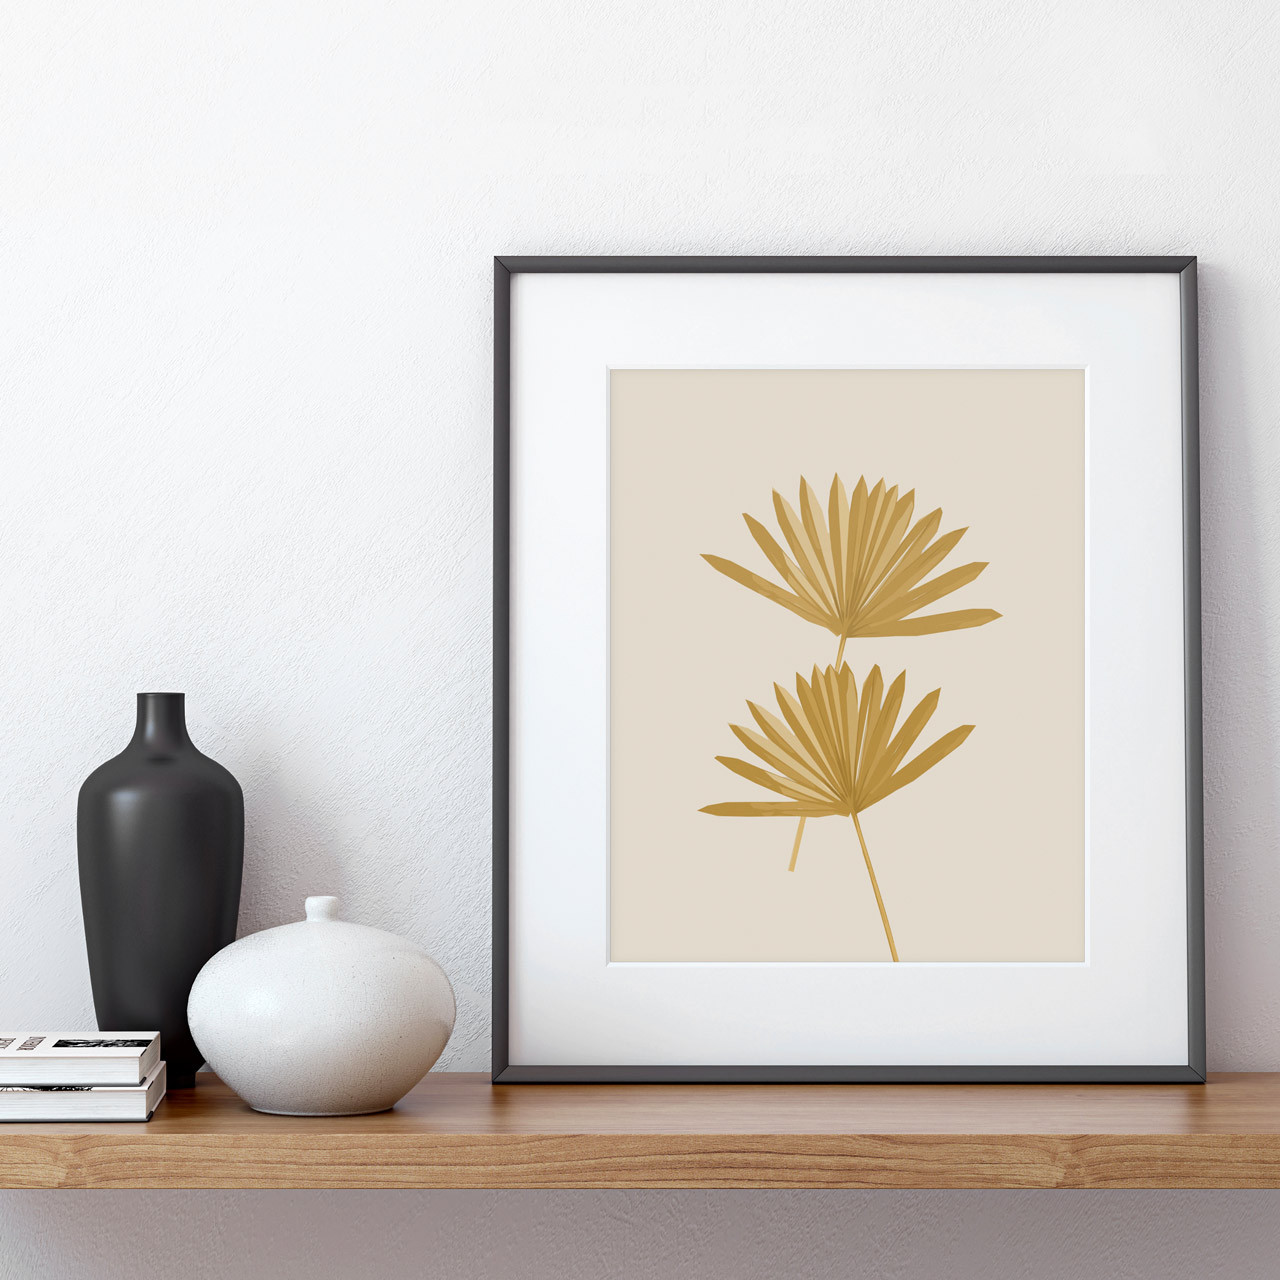 'Sun Palm III' in Ochre Abstract Palm Leaf Art Print from The Printed Home